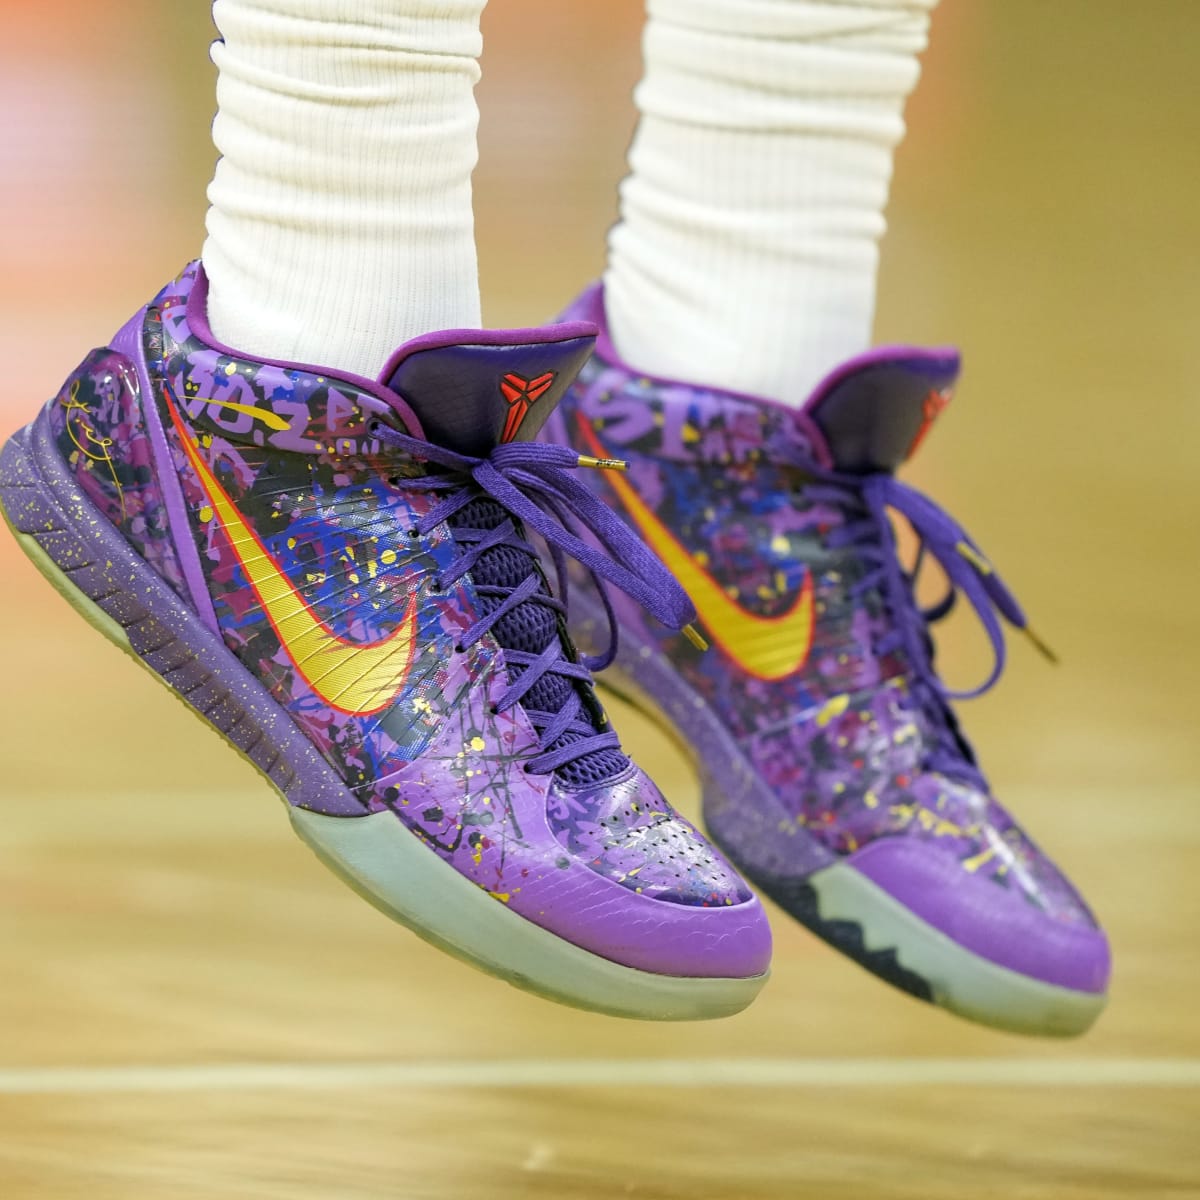 Athletes Carry on Kobe Bryant's Legacy With Shoes - Sports Illustrated  FanNation Kicks News, Analysis and More